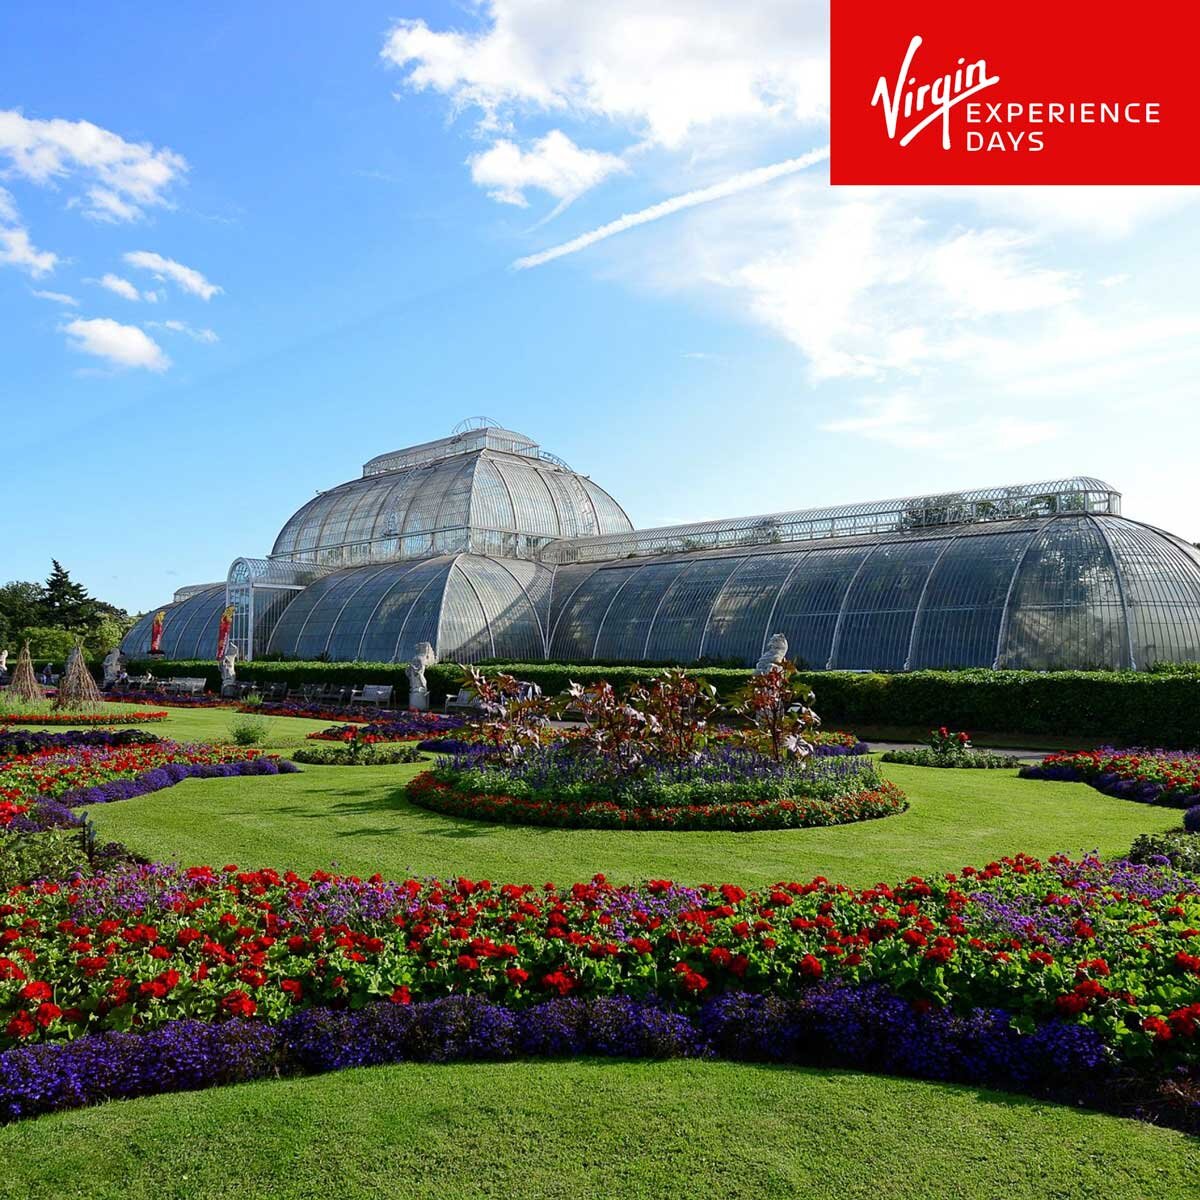 Virgin Experience Days Visit to Kew Gardens with Cream Tea for Two 